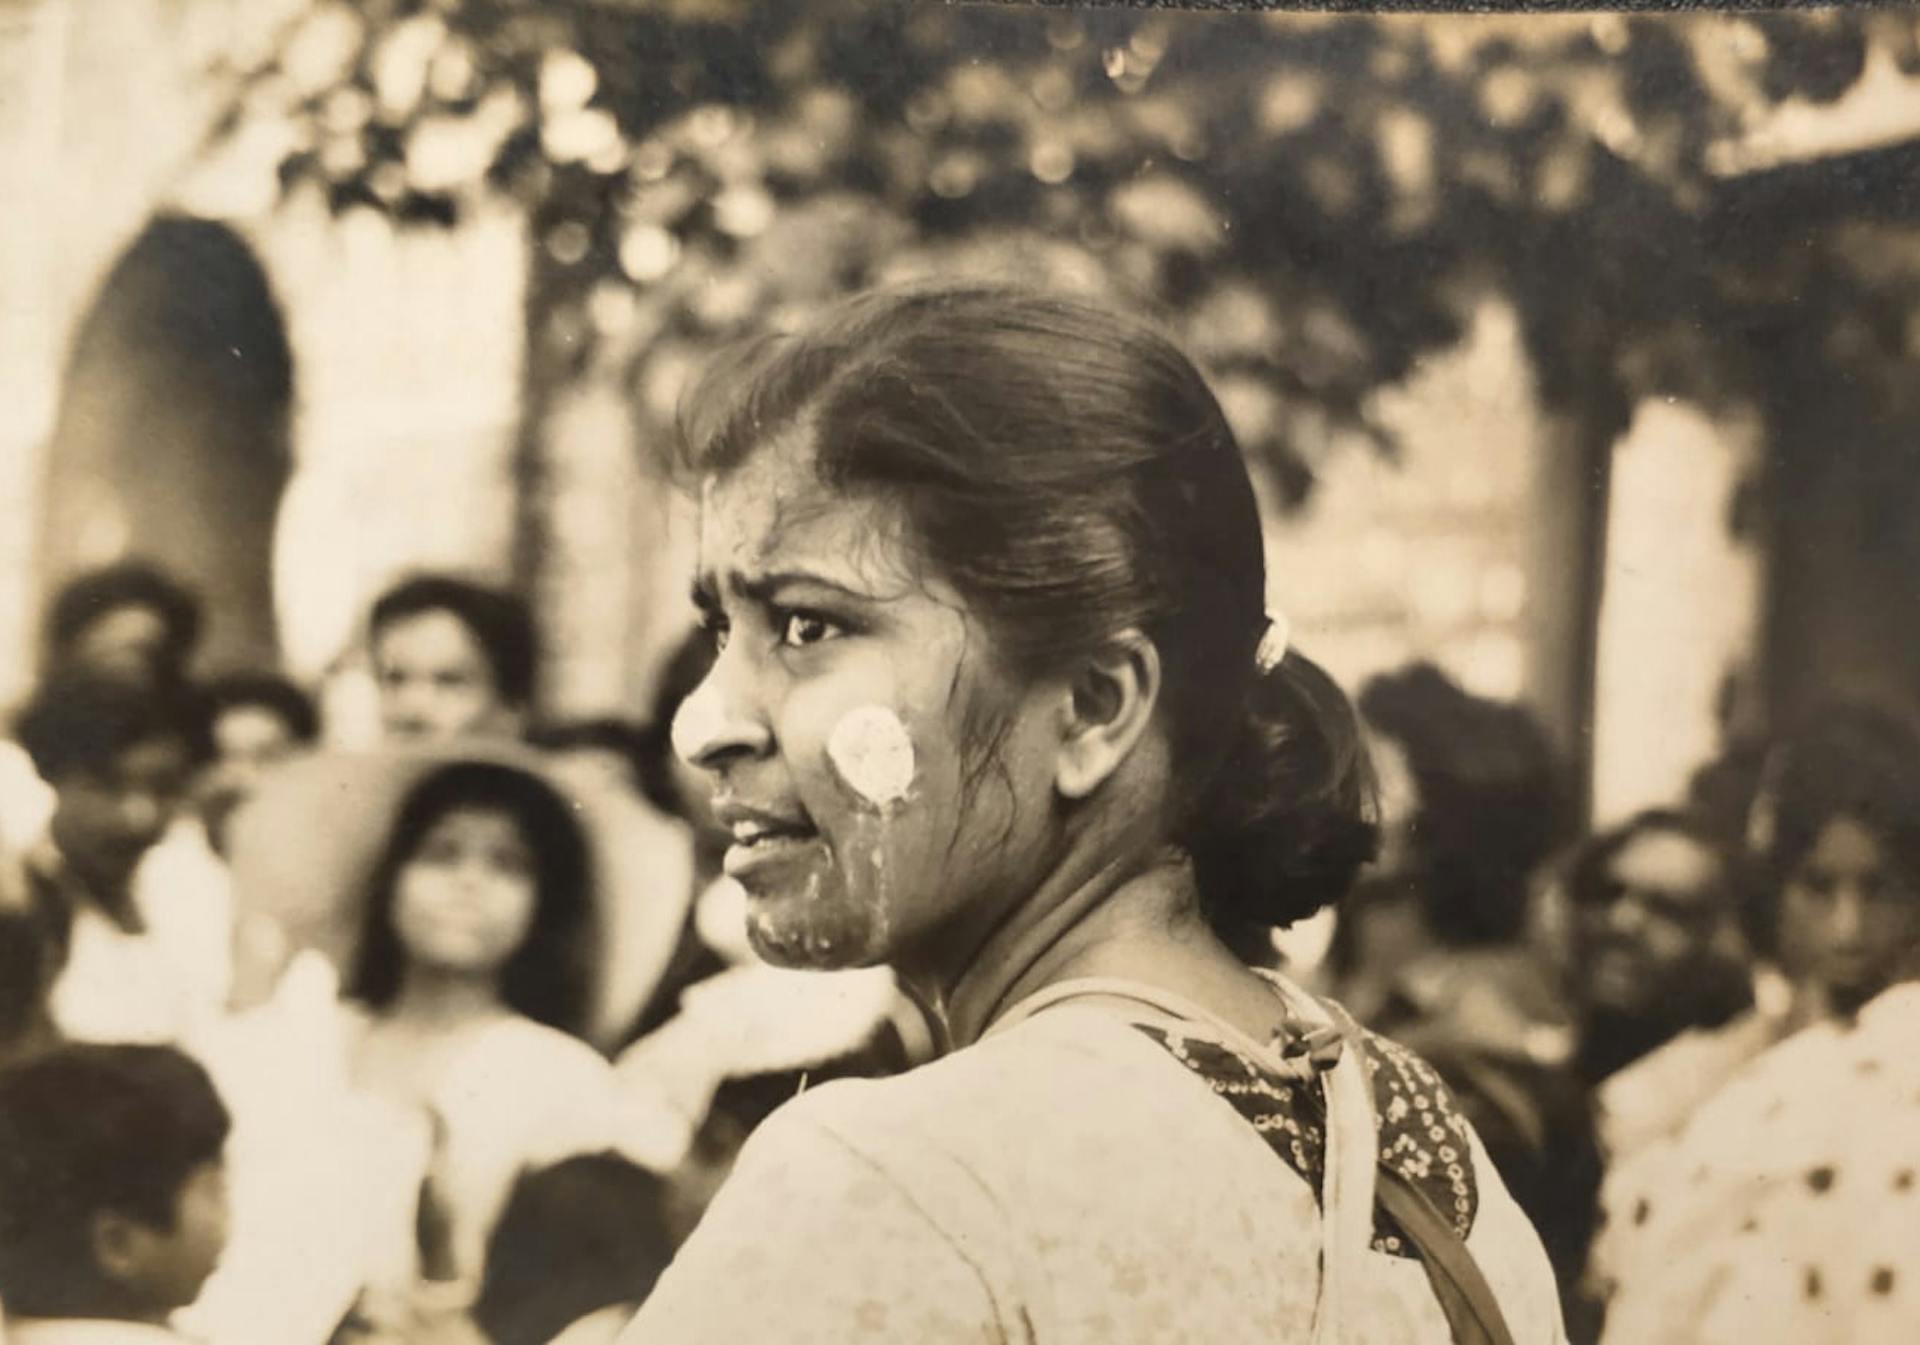 Chayanika participating in a street play in 1987. Courtesy Chayanika Shah